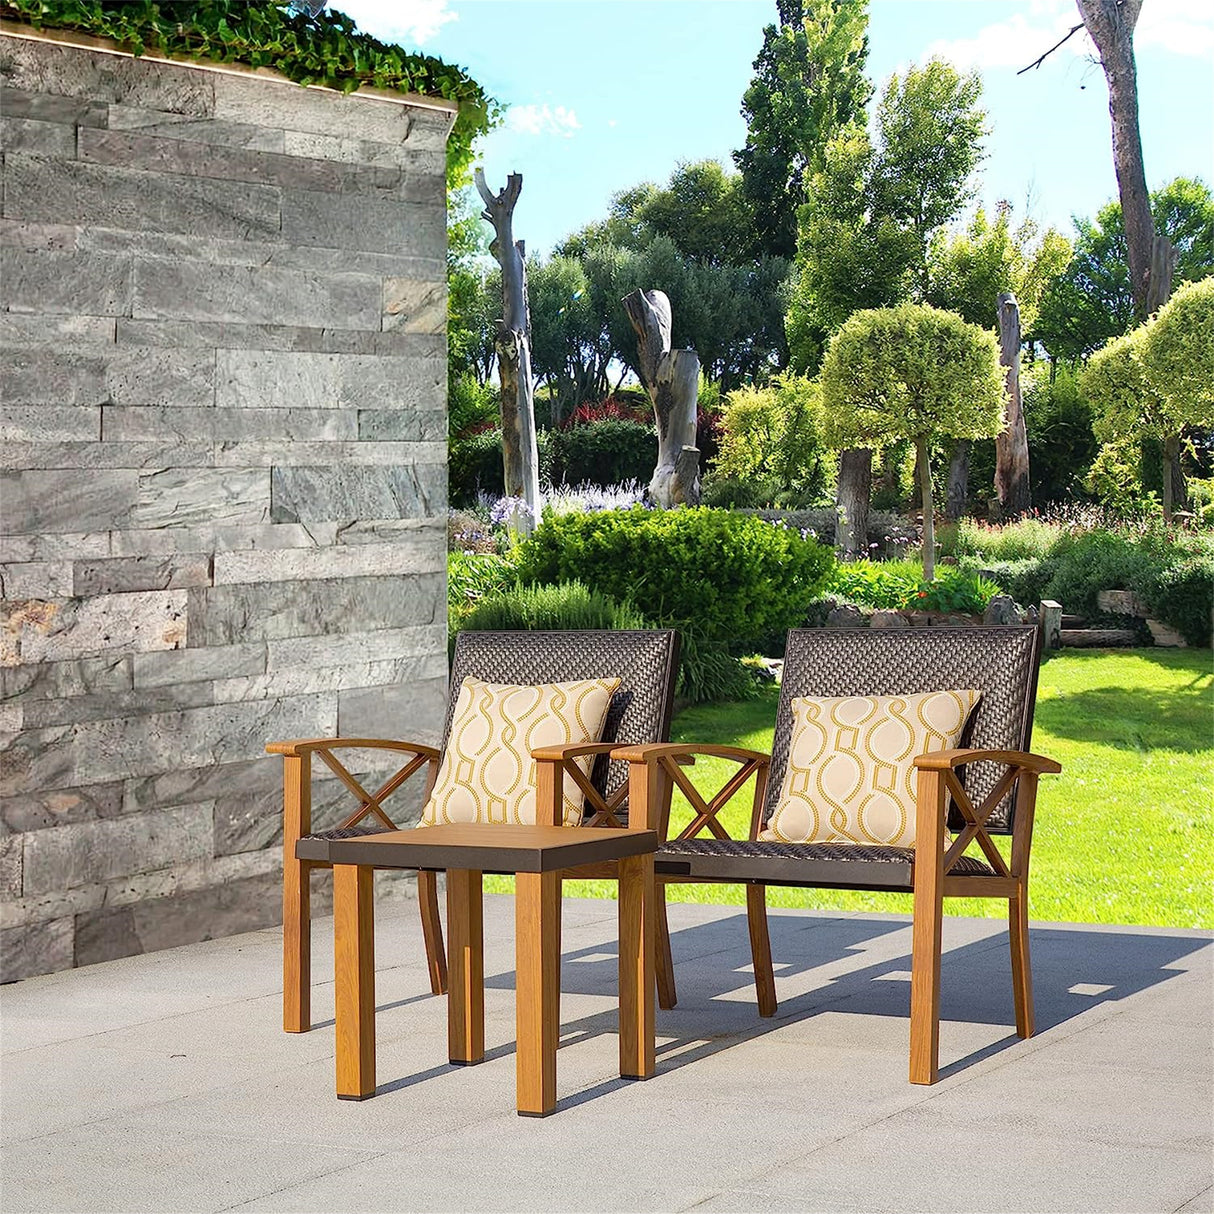 Patio Bistro Set 3 Pieces with Wood Grain Aluminum Wicker Padded Porch Chairs,Coffee Table,Outdoor Conversation Set with Beige Sunbrella Pillows(1Table+2 Chairs)